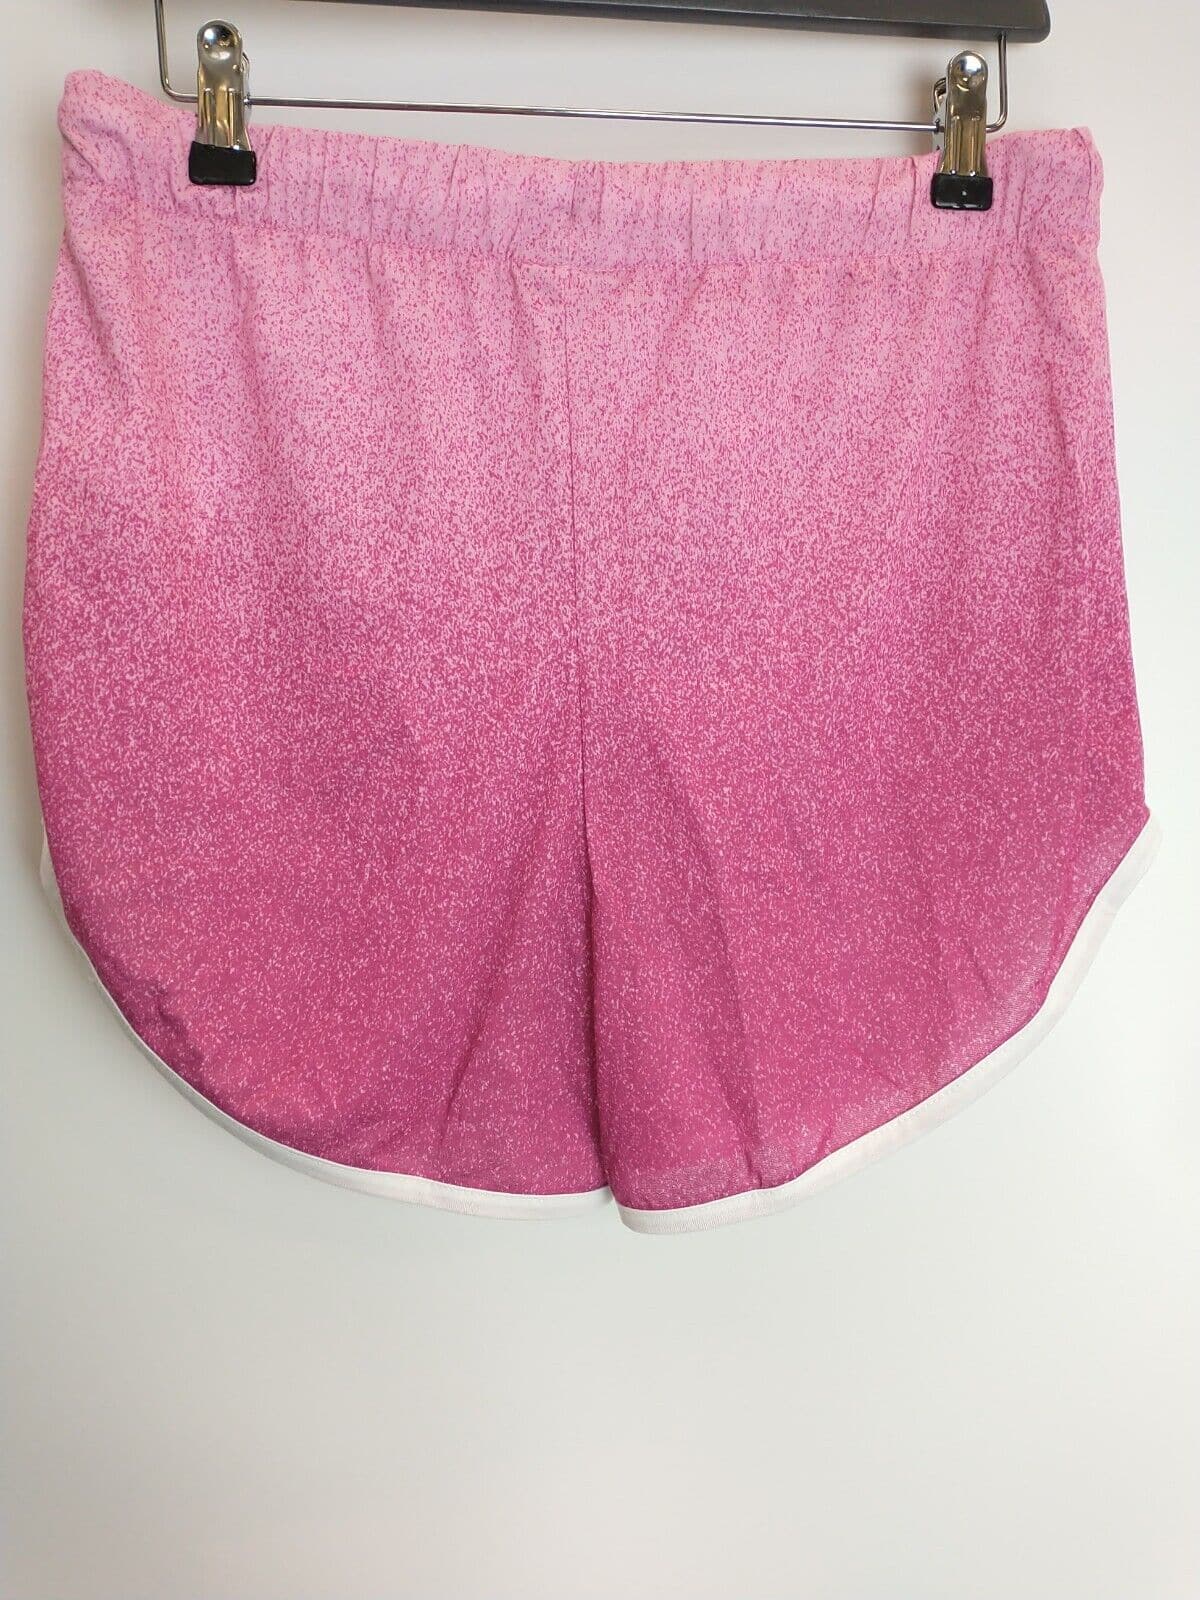 Hype Girls Pink Speckle Fade Script Runner Shorts Size 15 Years **** V91